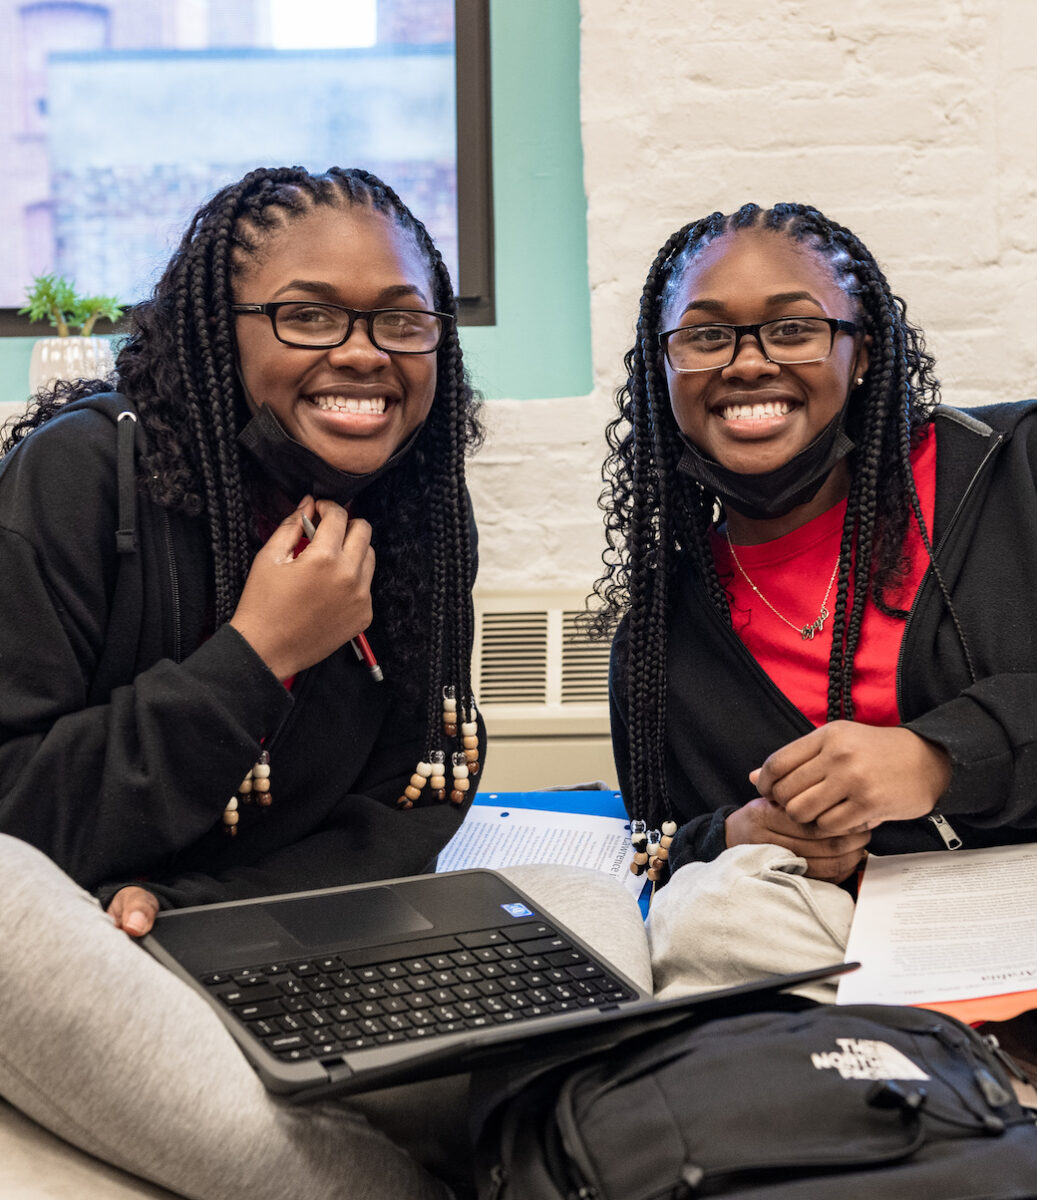 Twin teen girls smiling at the camera in Leadership Academy